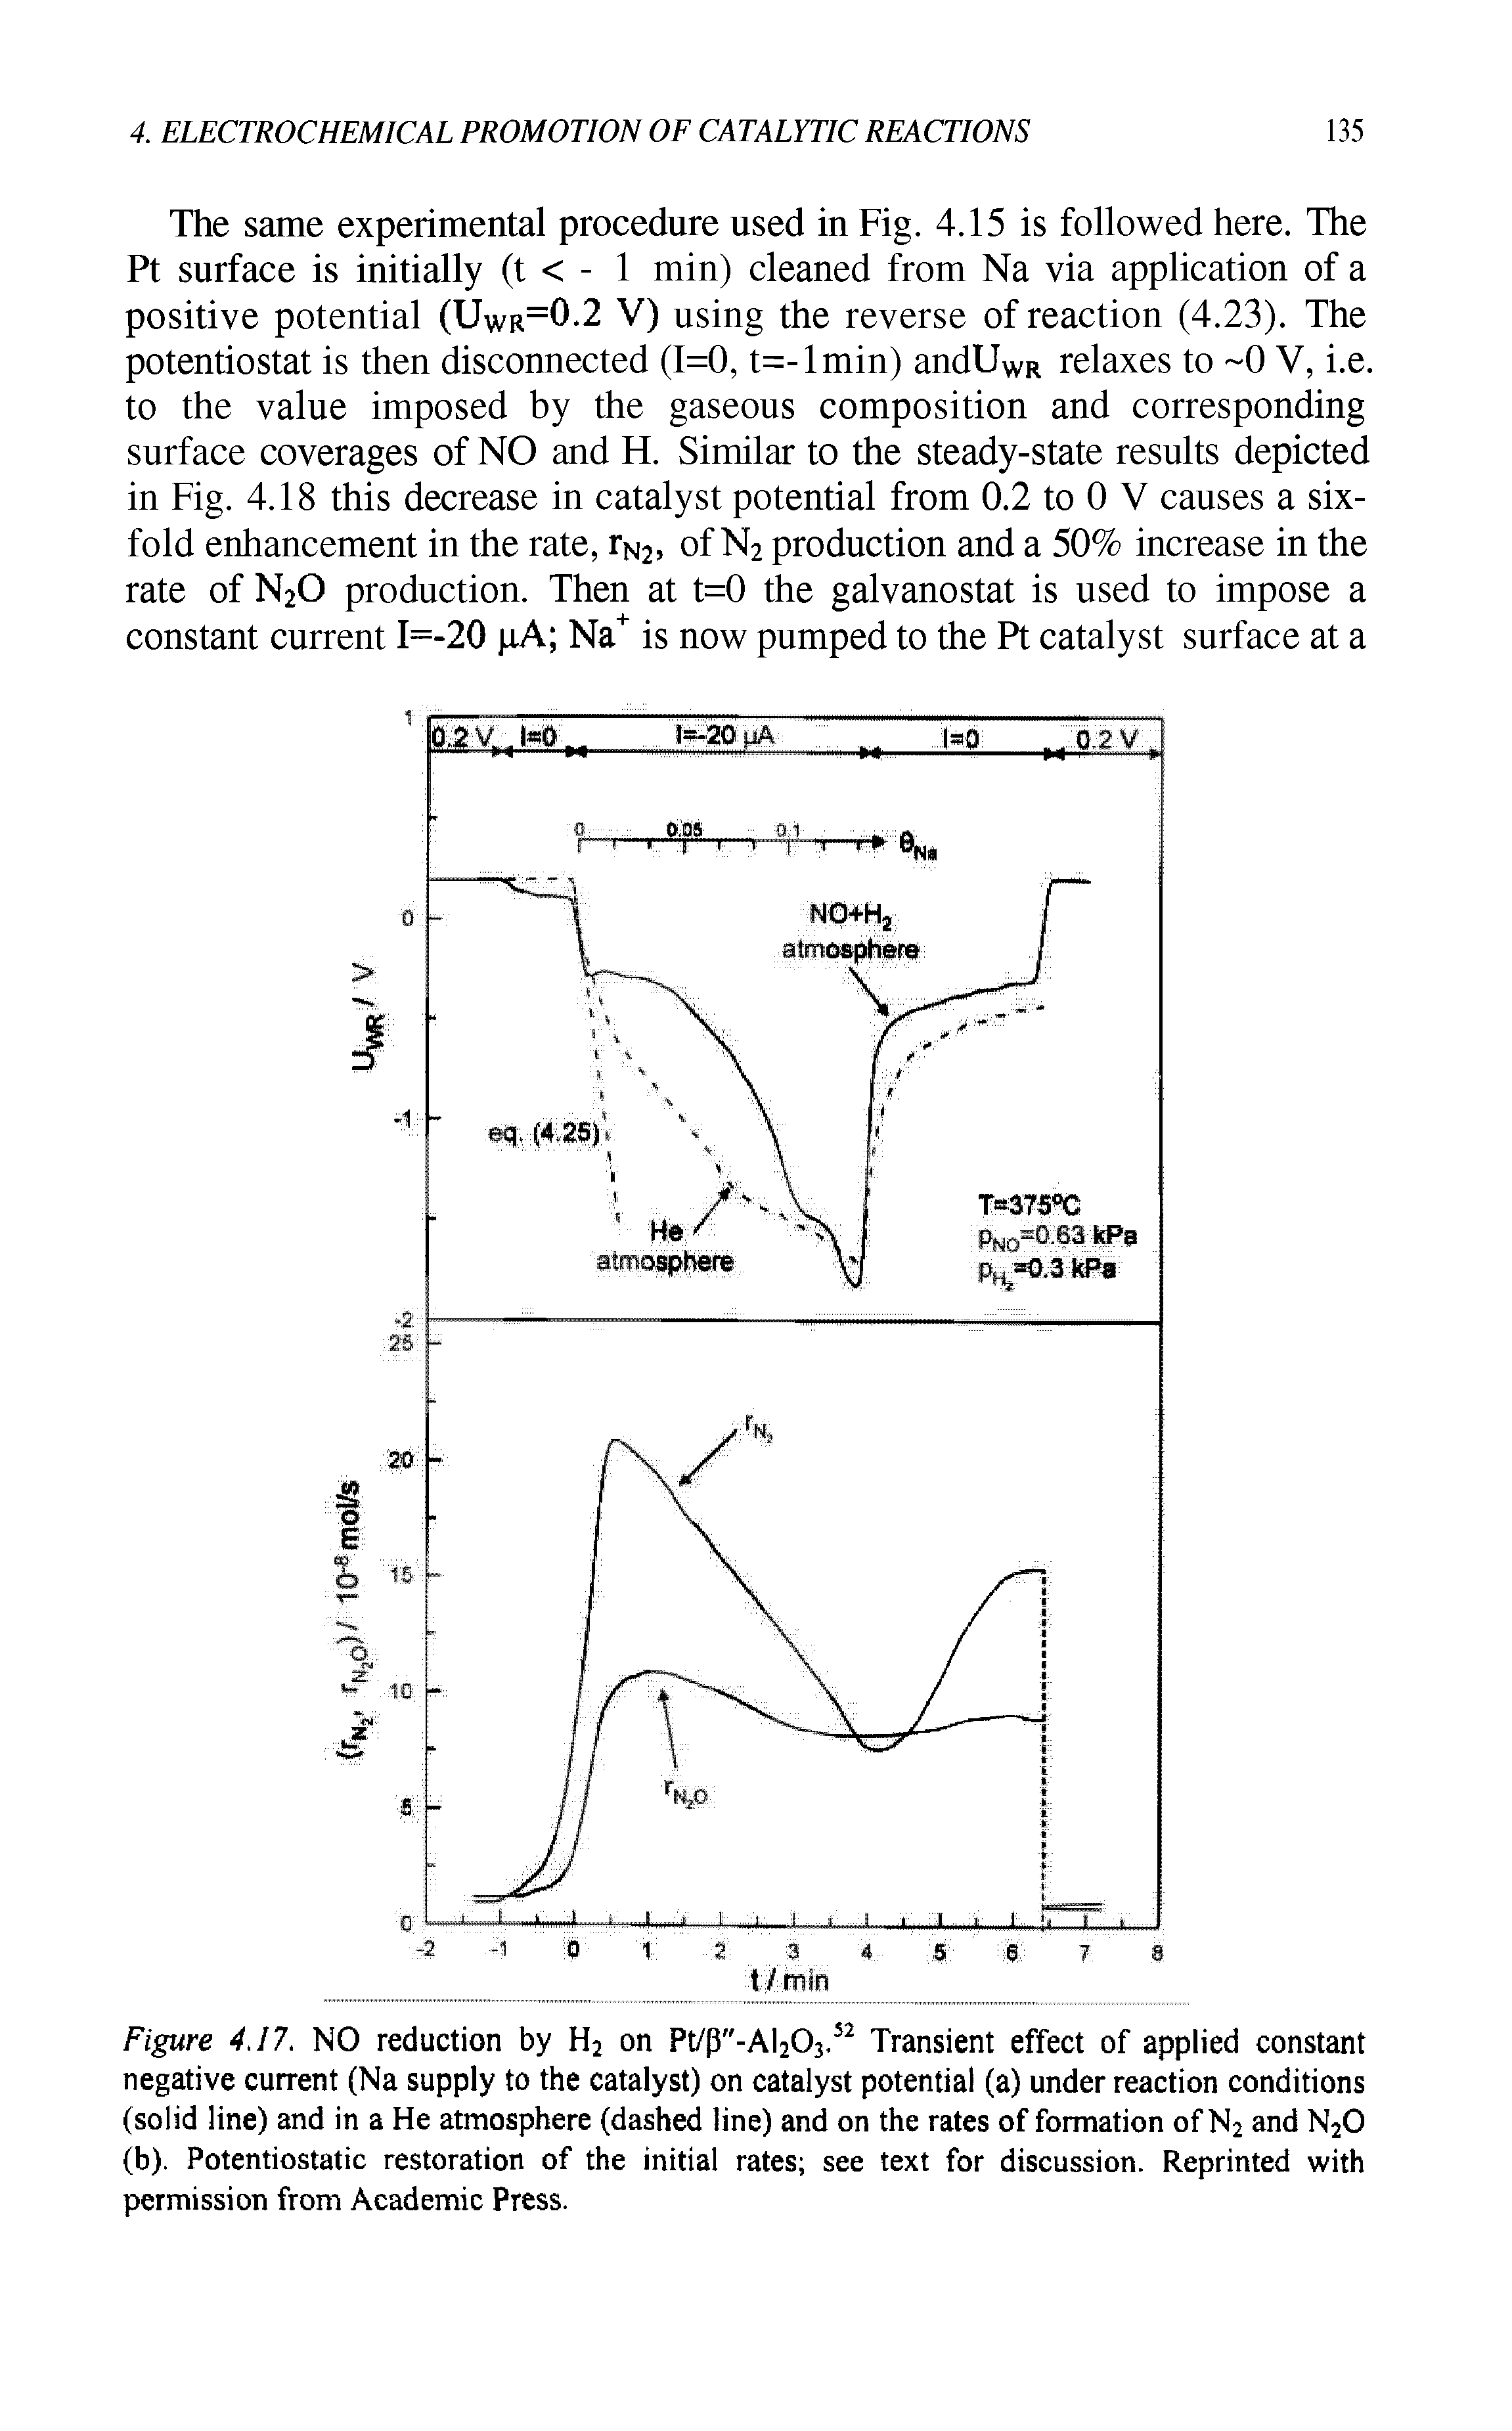 Figure 4.17. NO reduction by H2 on Pt/p"-AI203.52 Transient effect of applied constant negative current (Na supply to the catalyst) on catalyst potential (a) under reaction conditions (solid line) and in a He atmosphere (dashed line) and on the rates of formation of N2 and N20 (b). Potentiostatic restoration of the initial rates see text for discussion. Reprinted with permission from Academic Press.